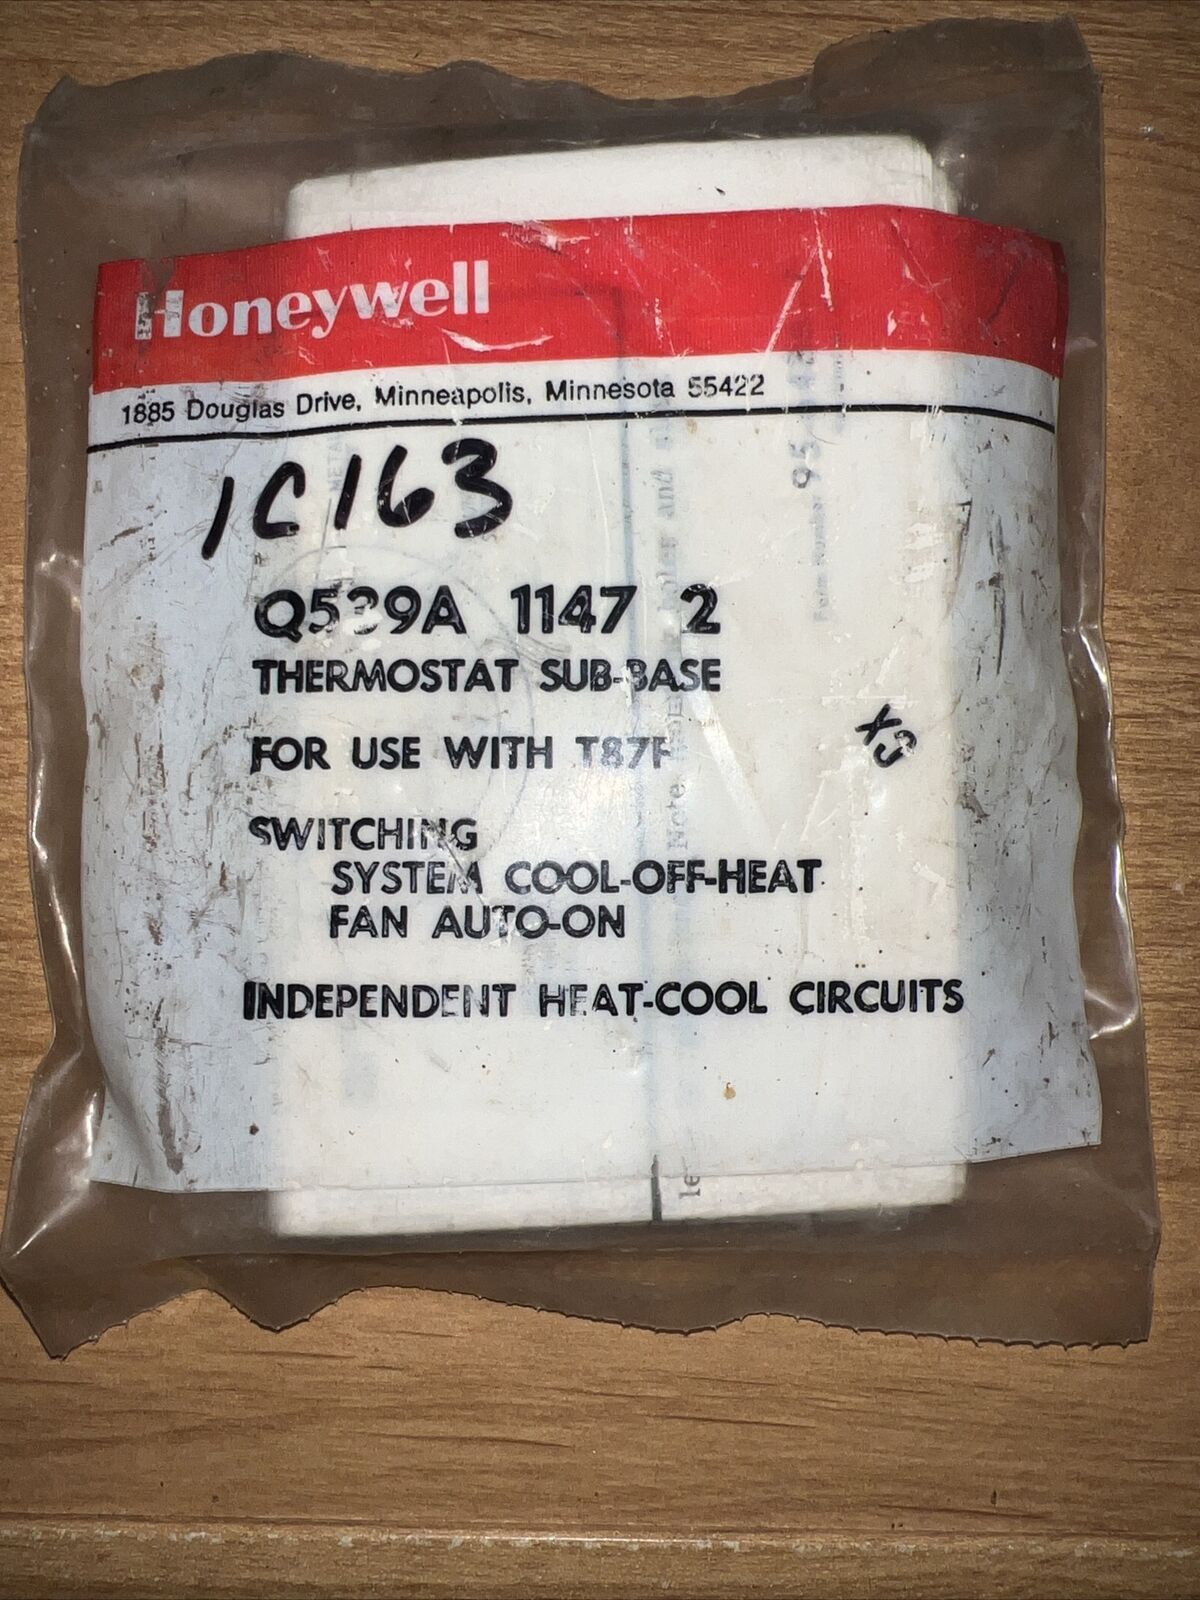 Honeywell Q539A 1147 Subbase for T87F Round Thermostat Heat-Off-Cool,Newoldstock